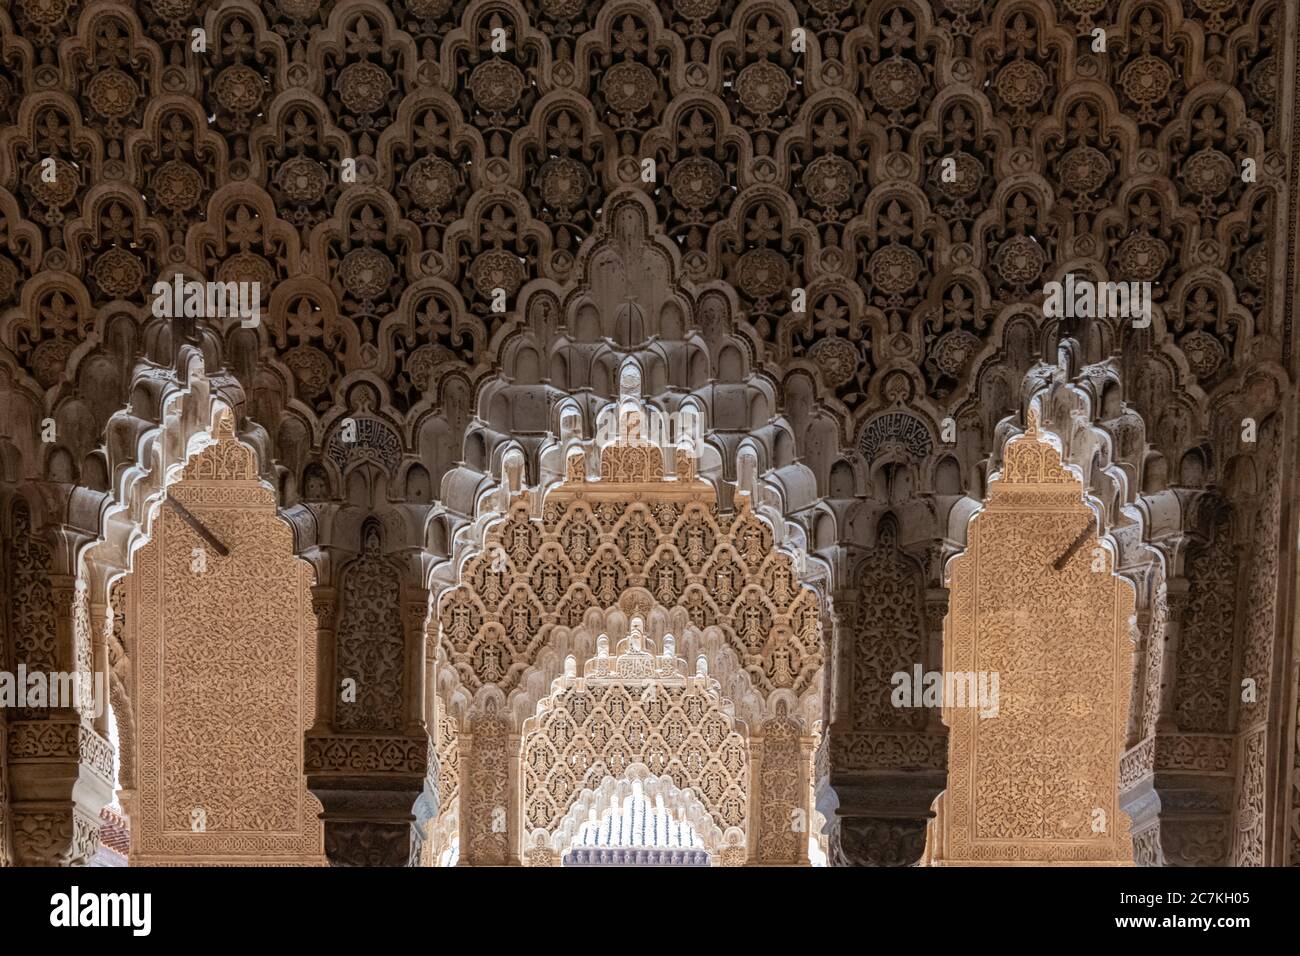 Like intricate lacework, the stone walls of the Hall of the Kings are covered in intricate arabesque designs. Stock Photo